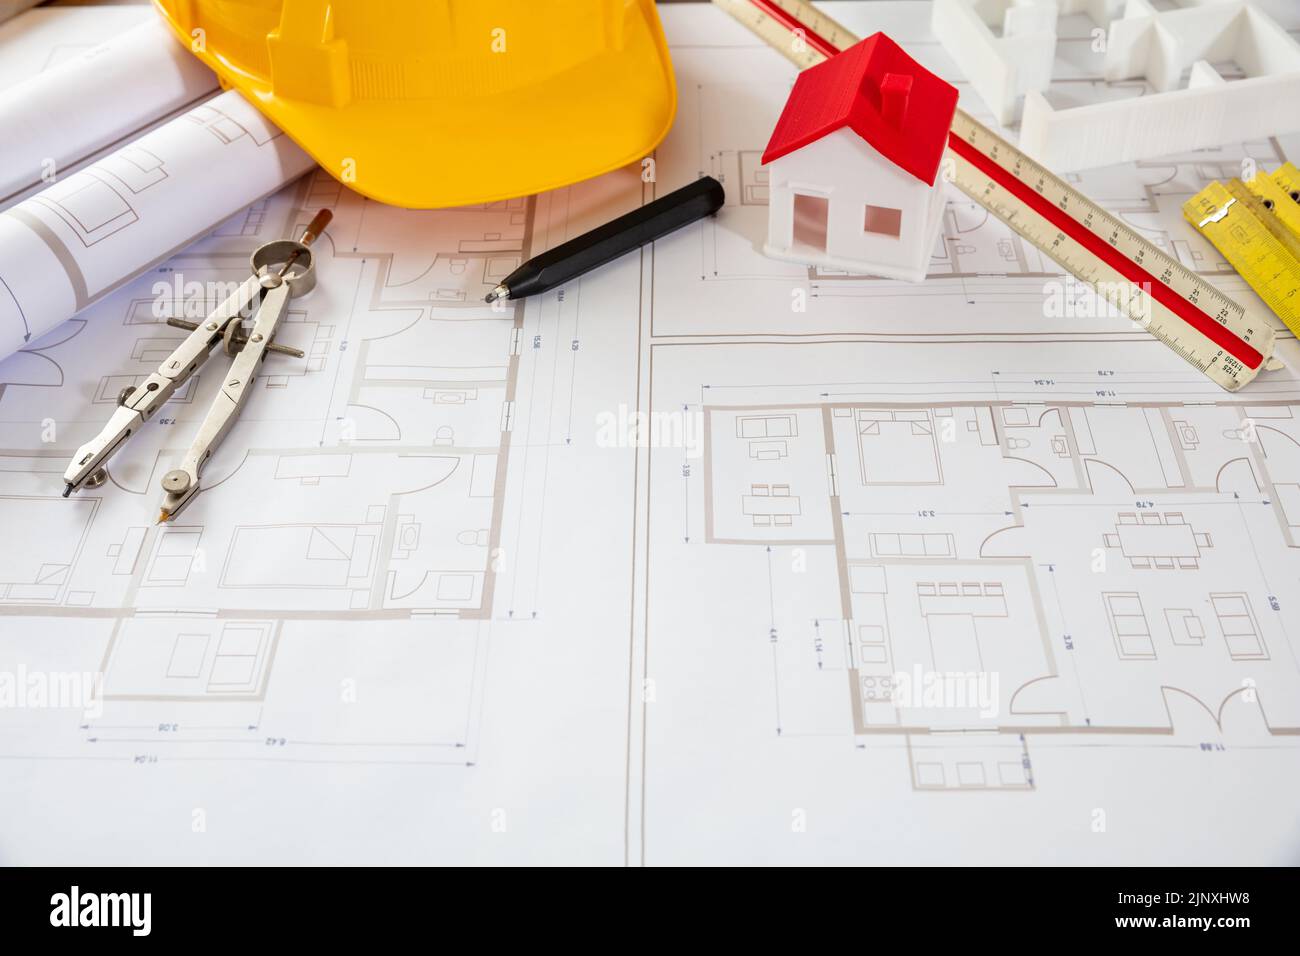 Architect engineer office. Construction safety helmet and engineering tools on building blueprint plans, copy space Stock Photo